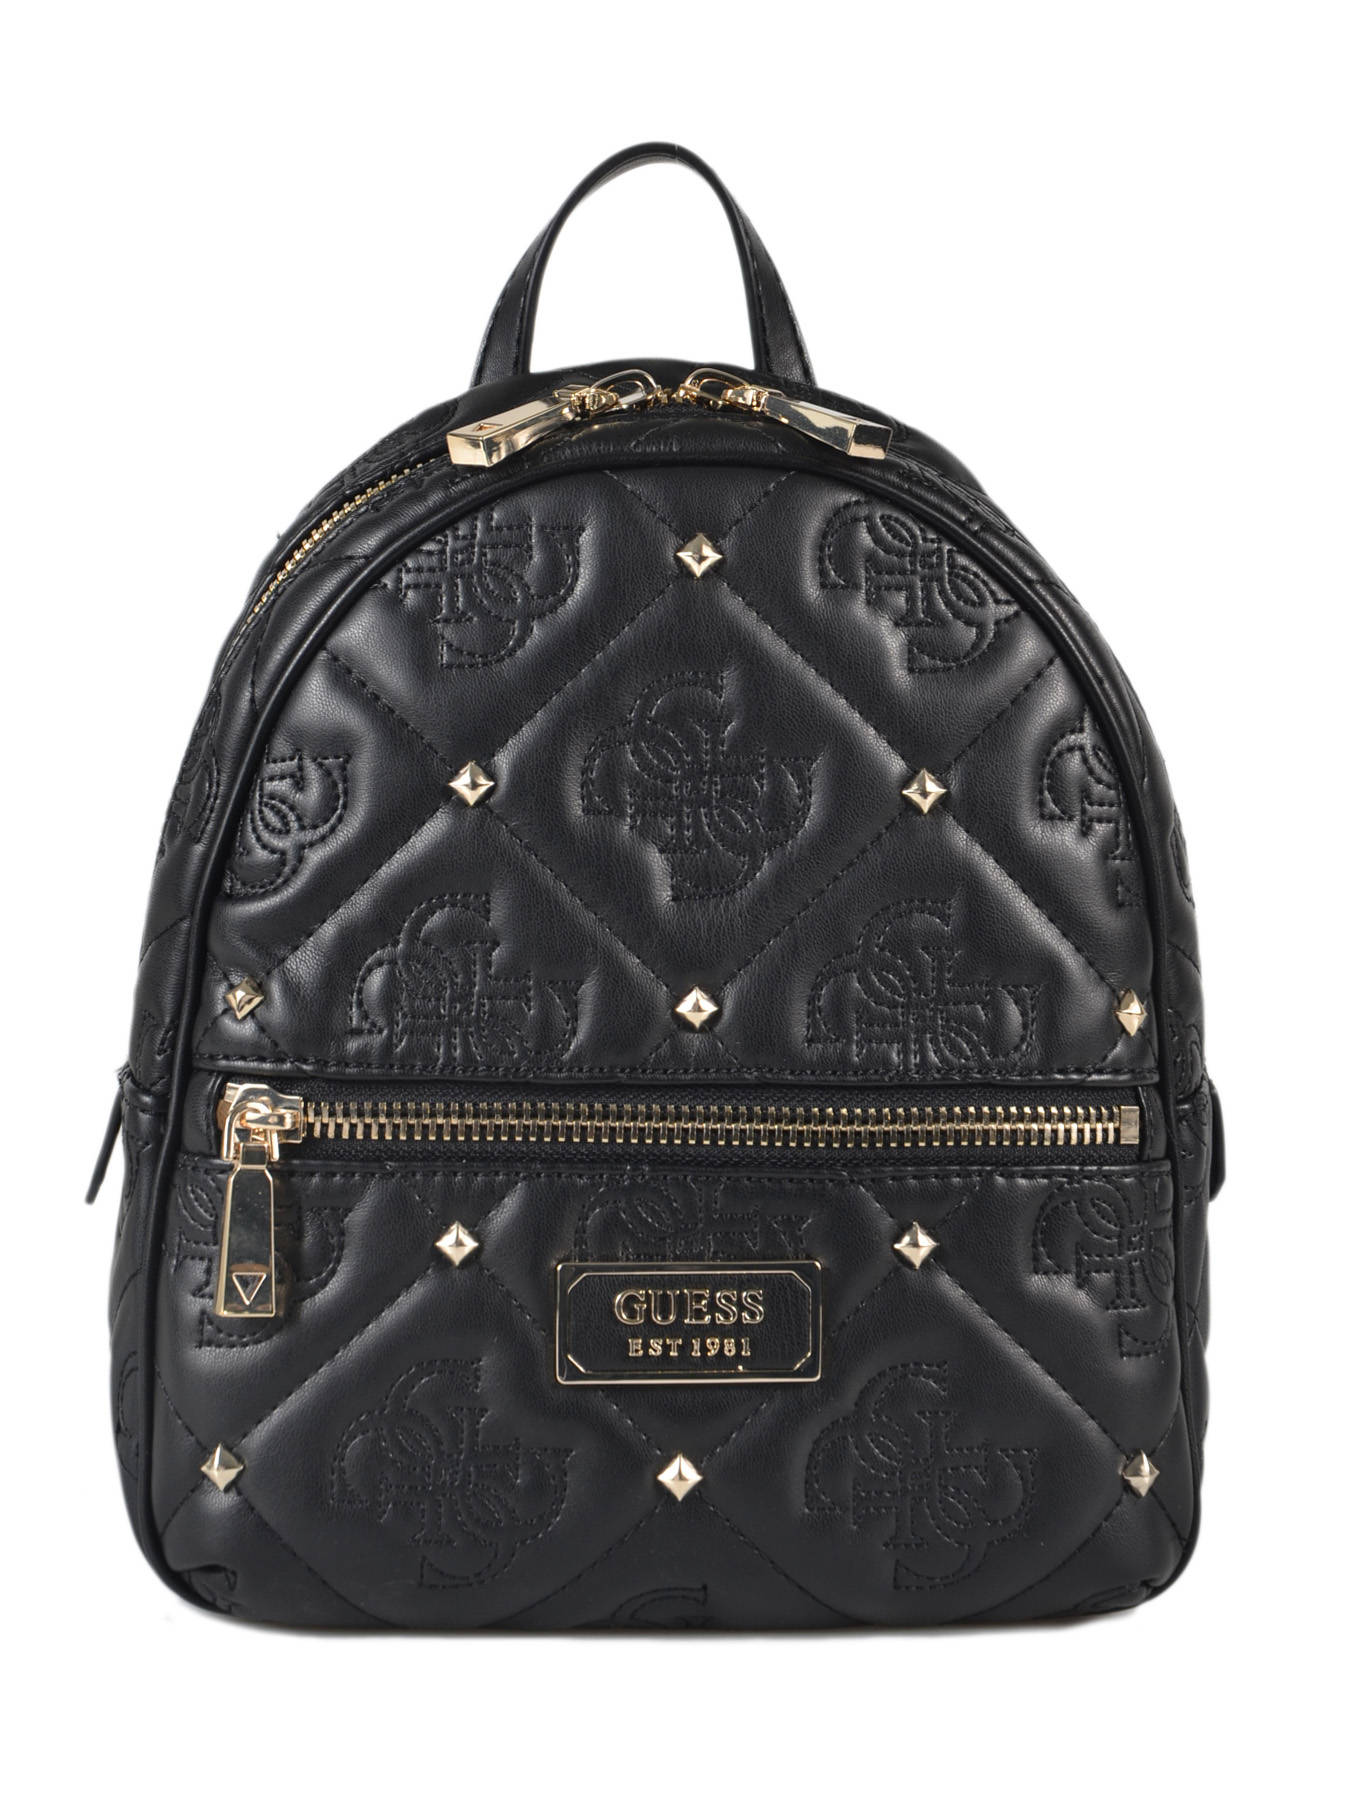 Guess Backpack HWVG.7432320 - best prices